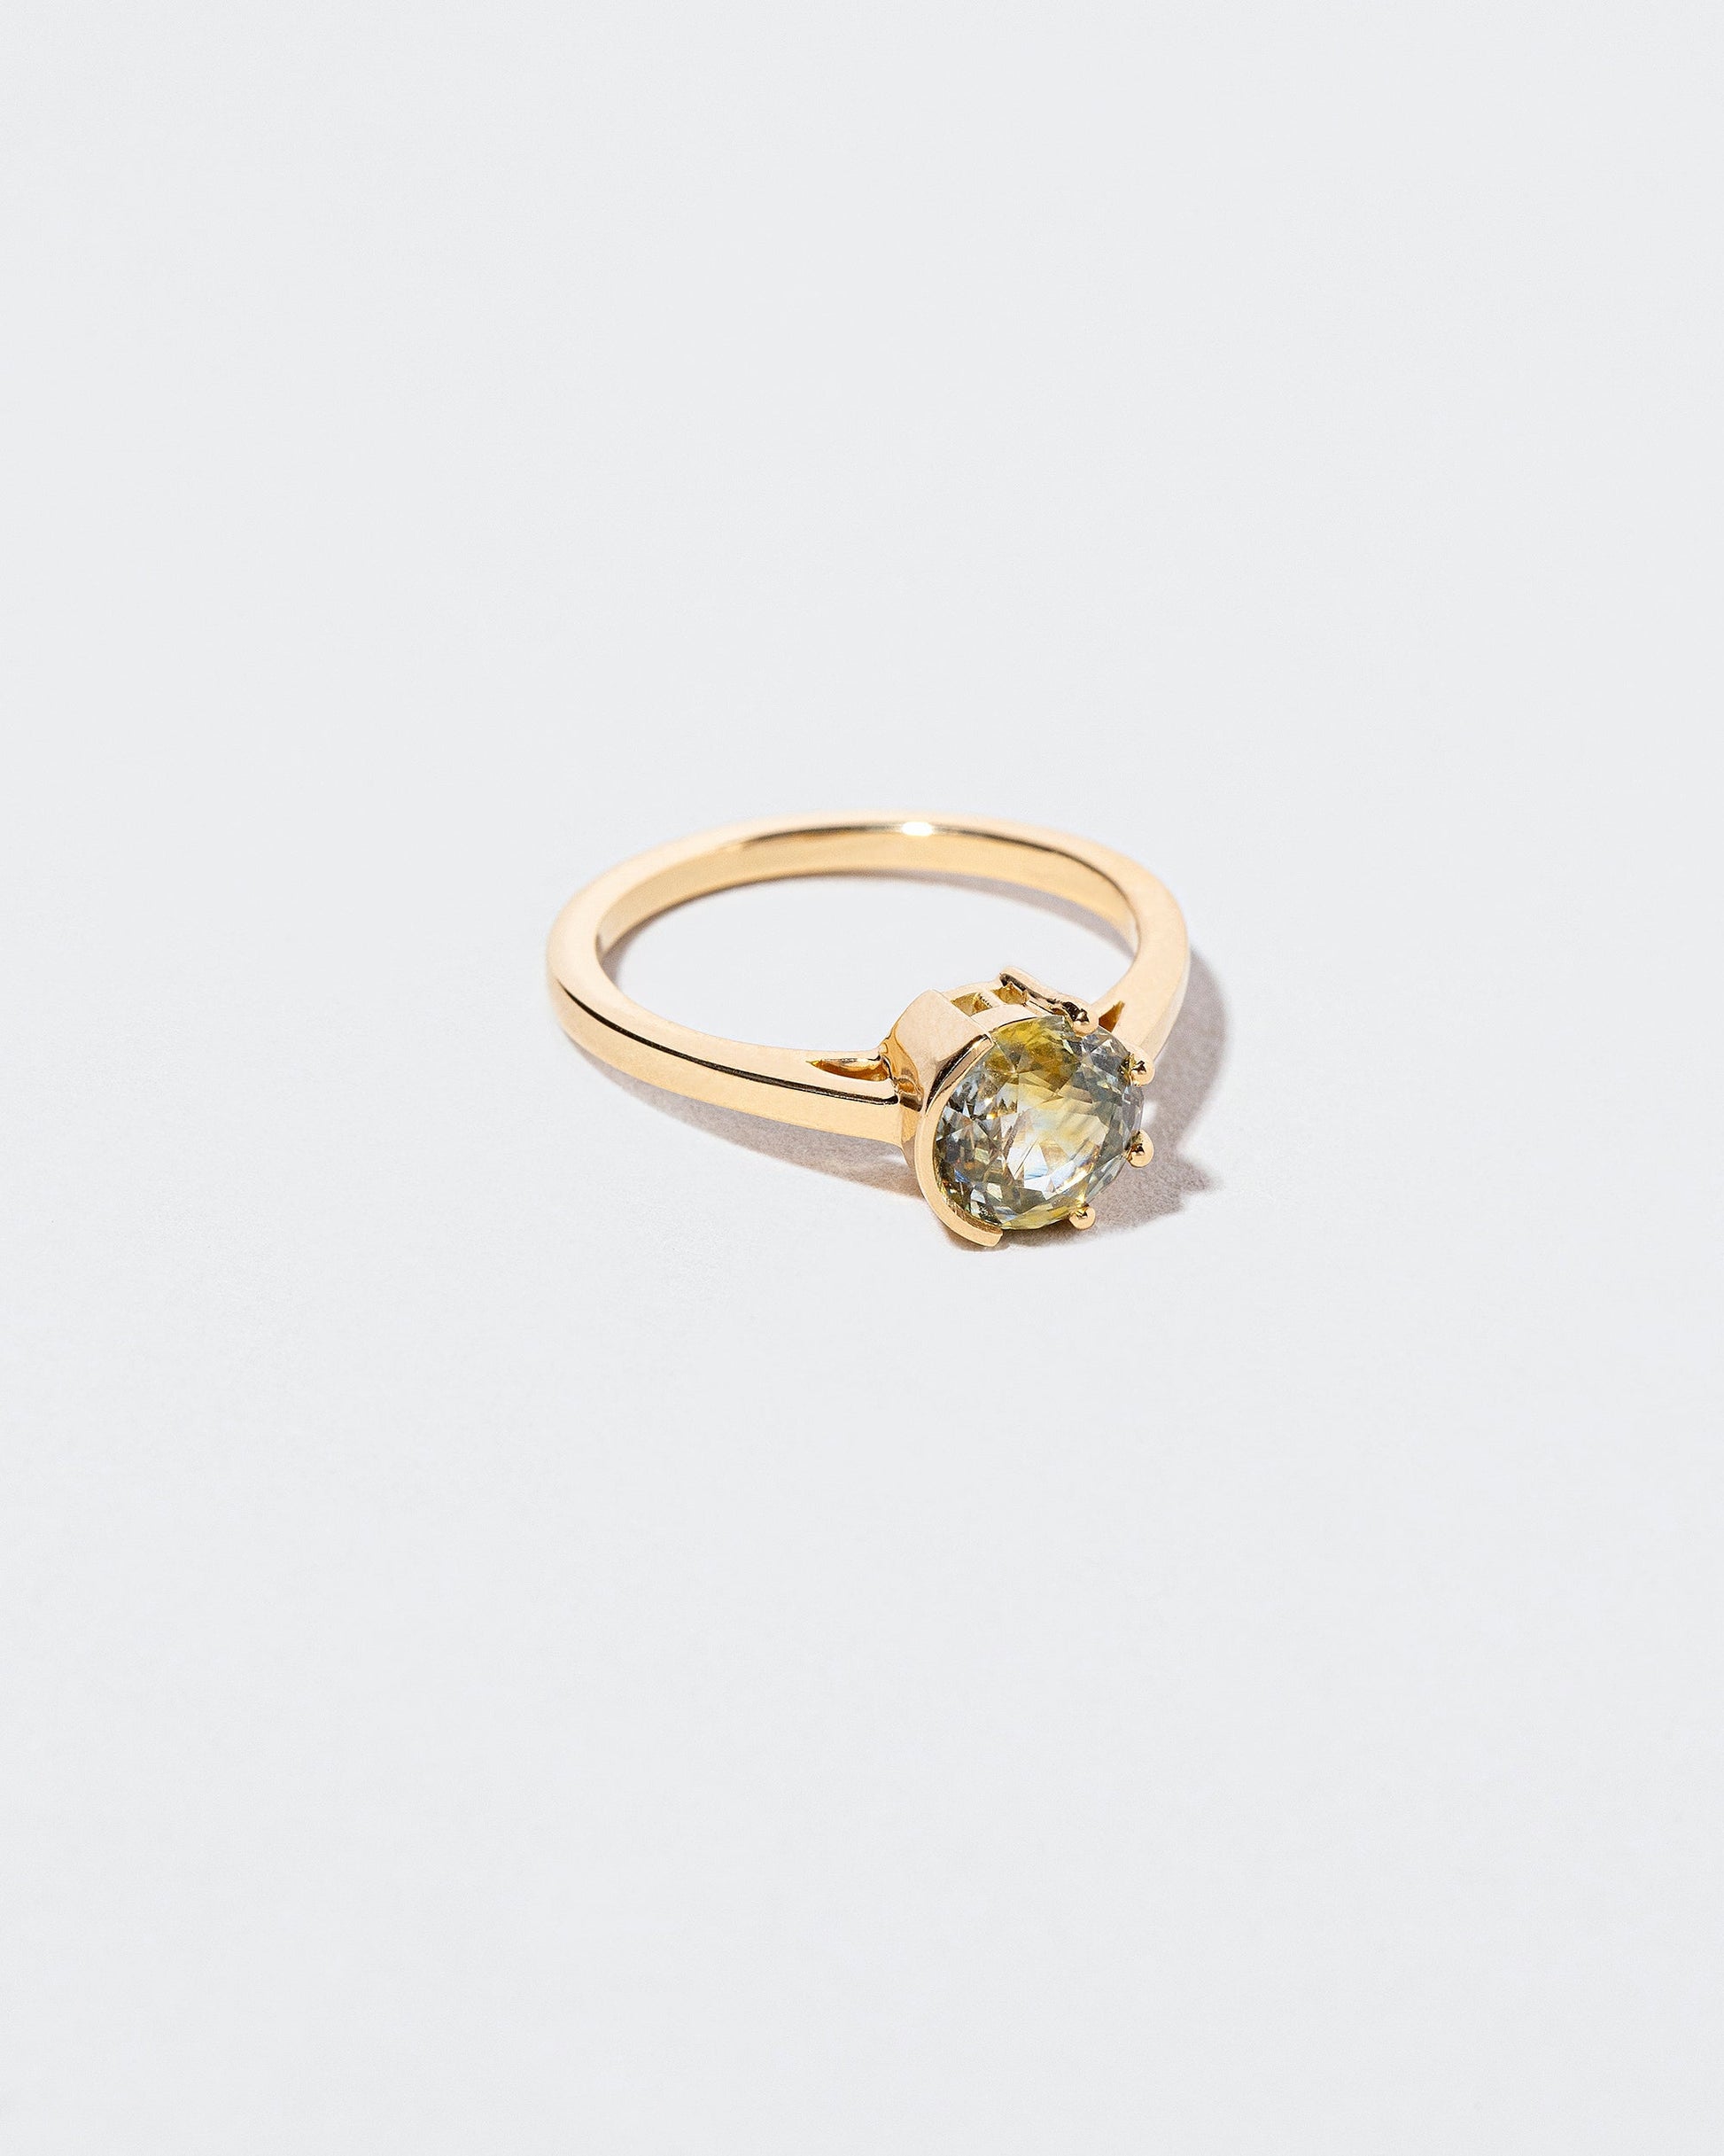  Sun & Moon Ring - Bicolor Sapphire on light color background.